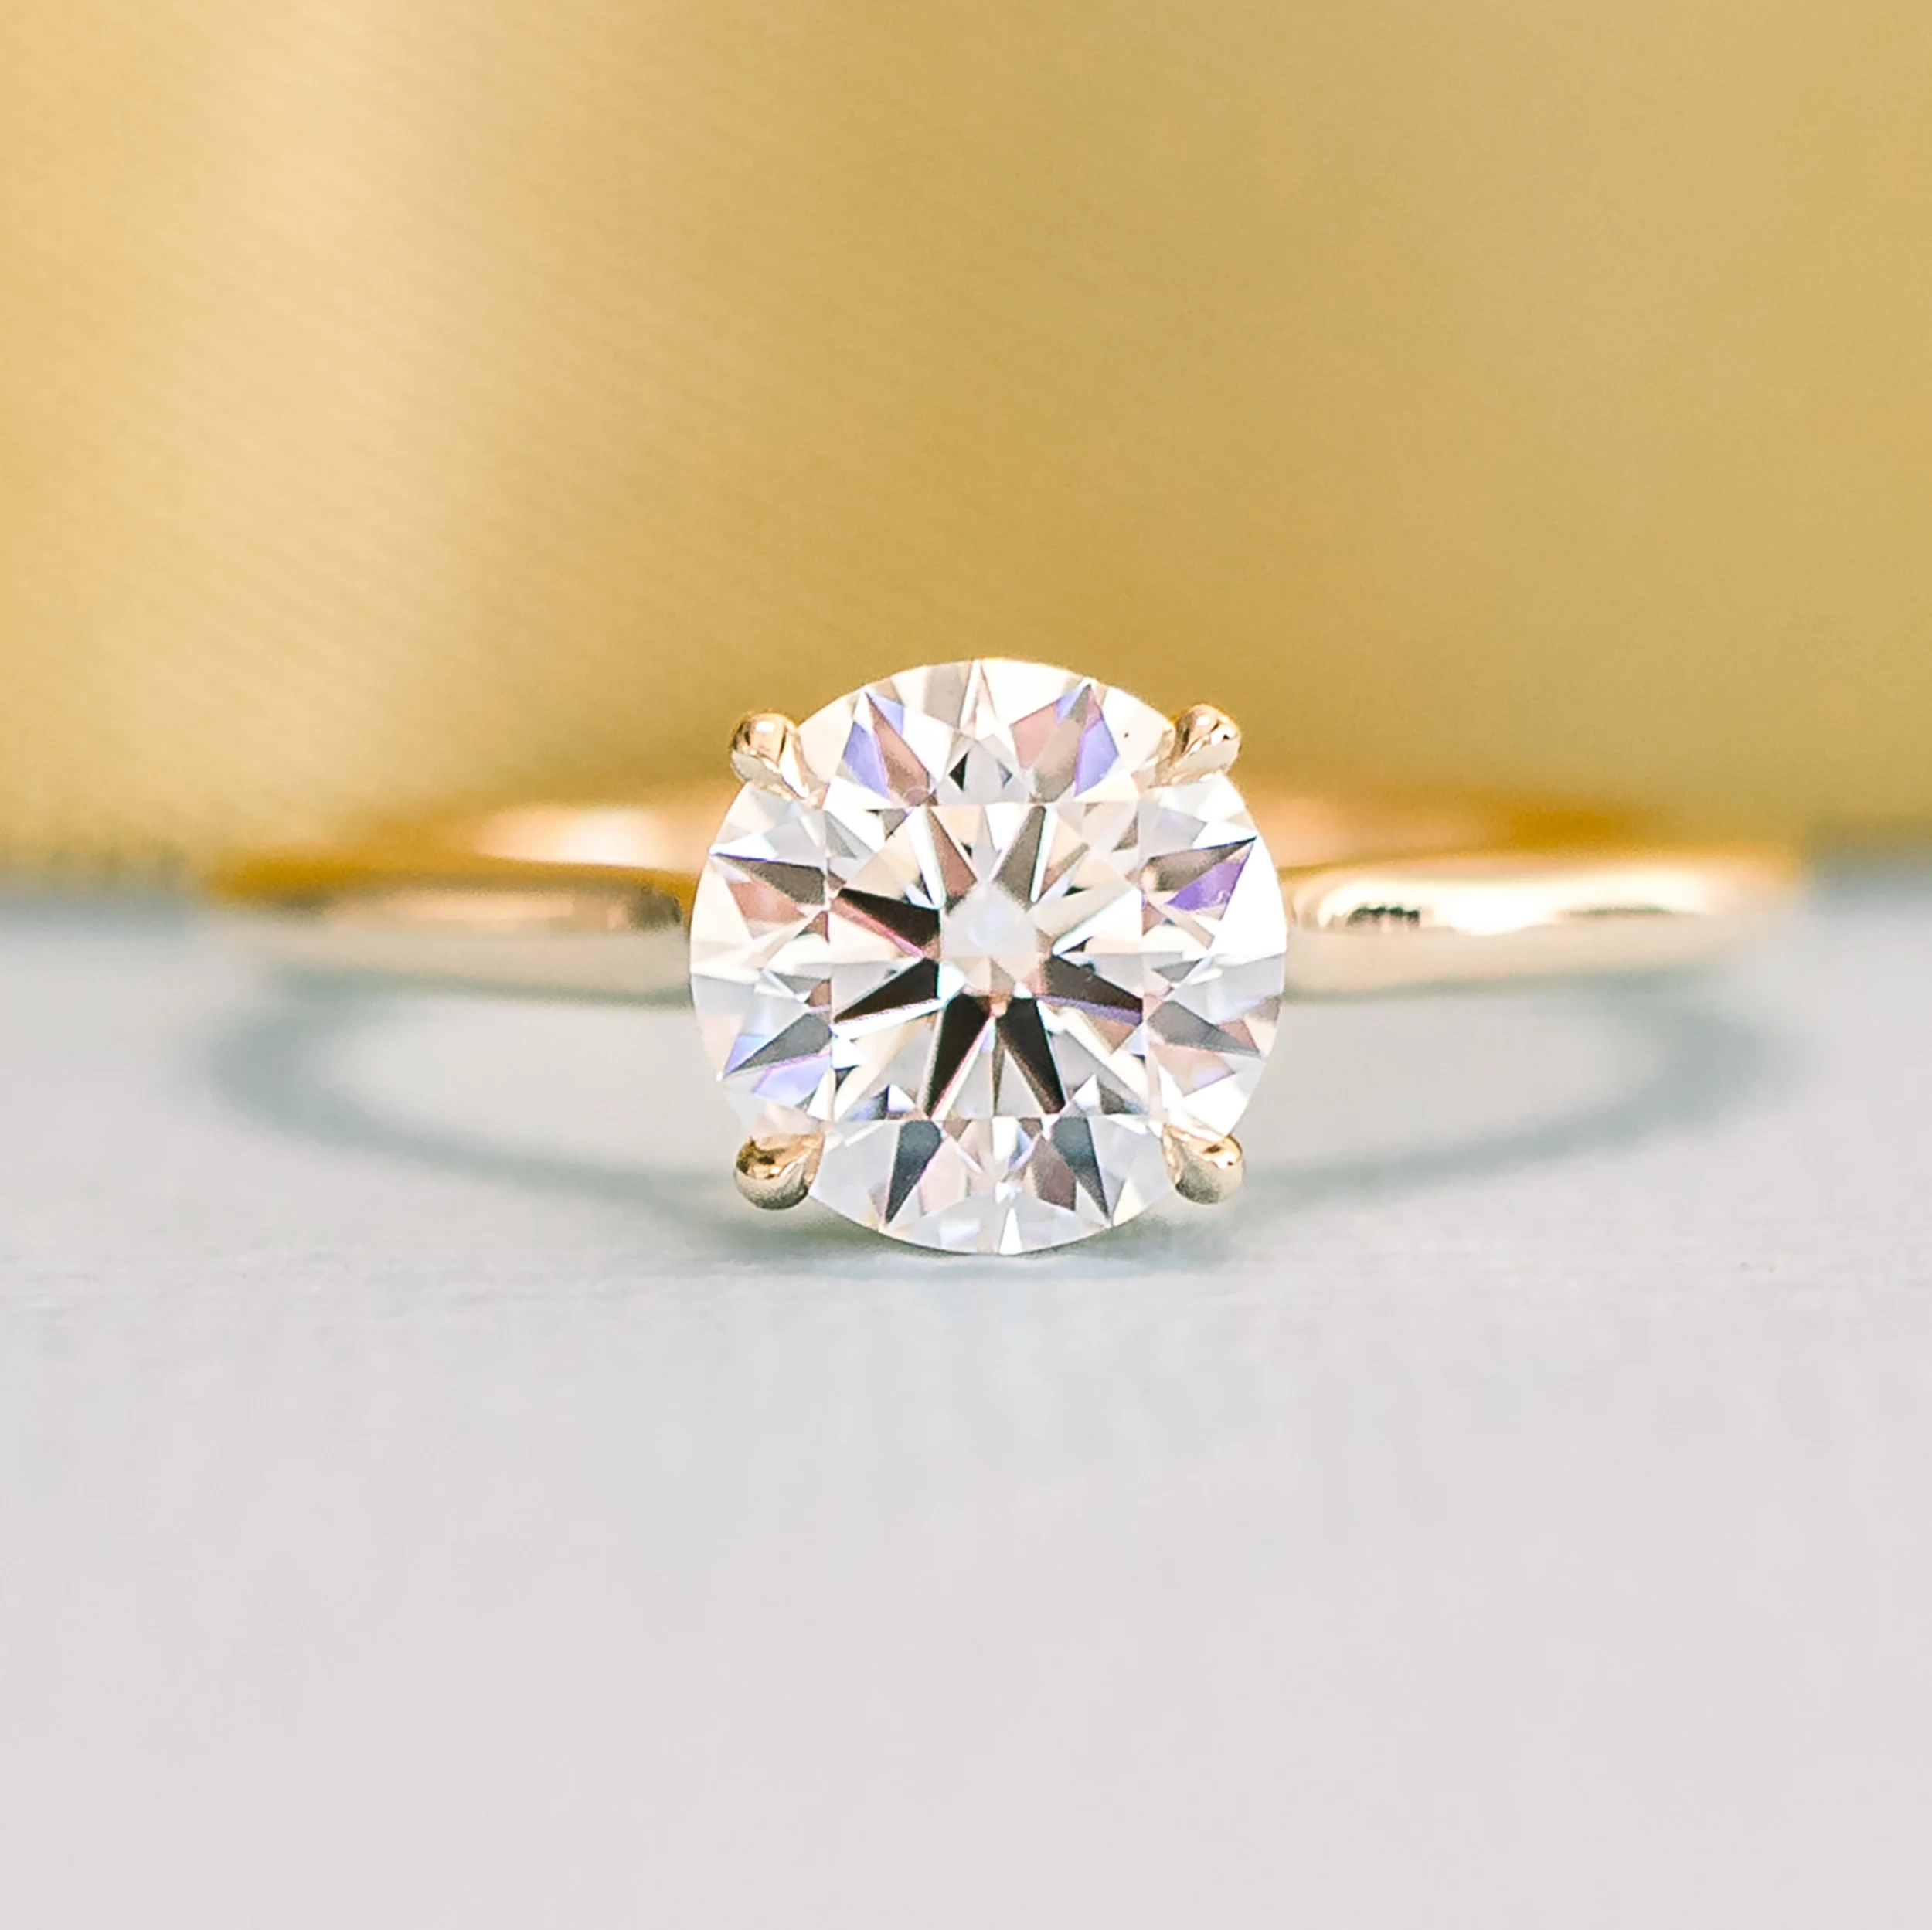 Round Trellis Solitaire featuring Hand Selected Synthetic Diamonds (Profile View)